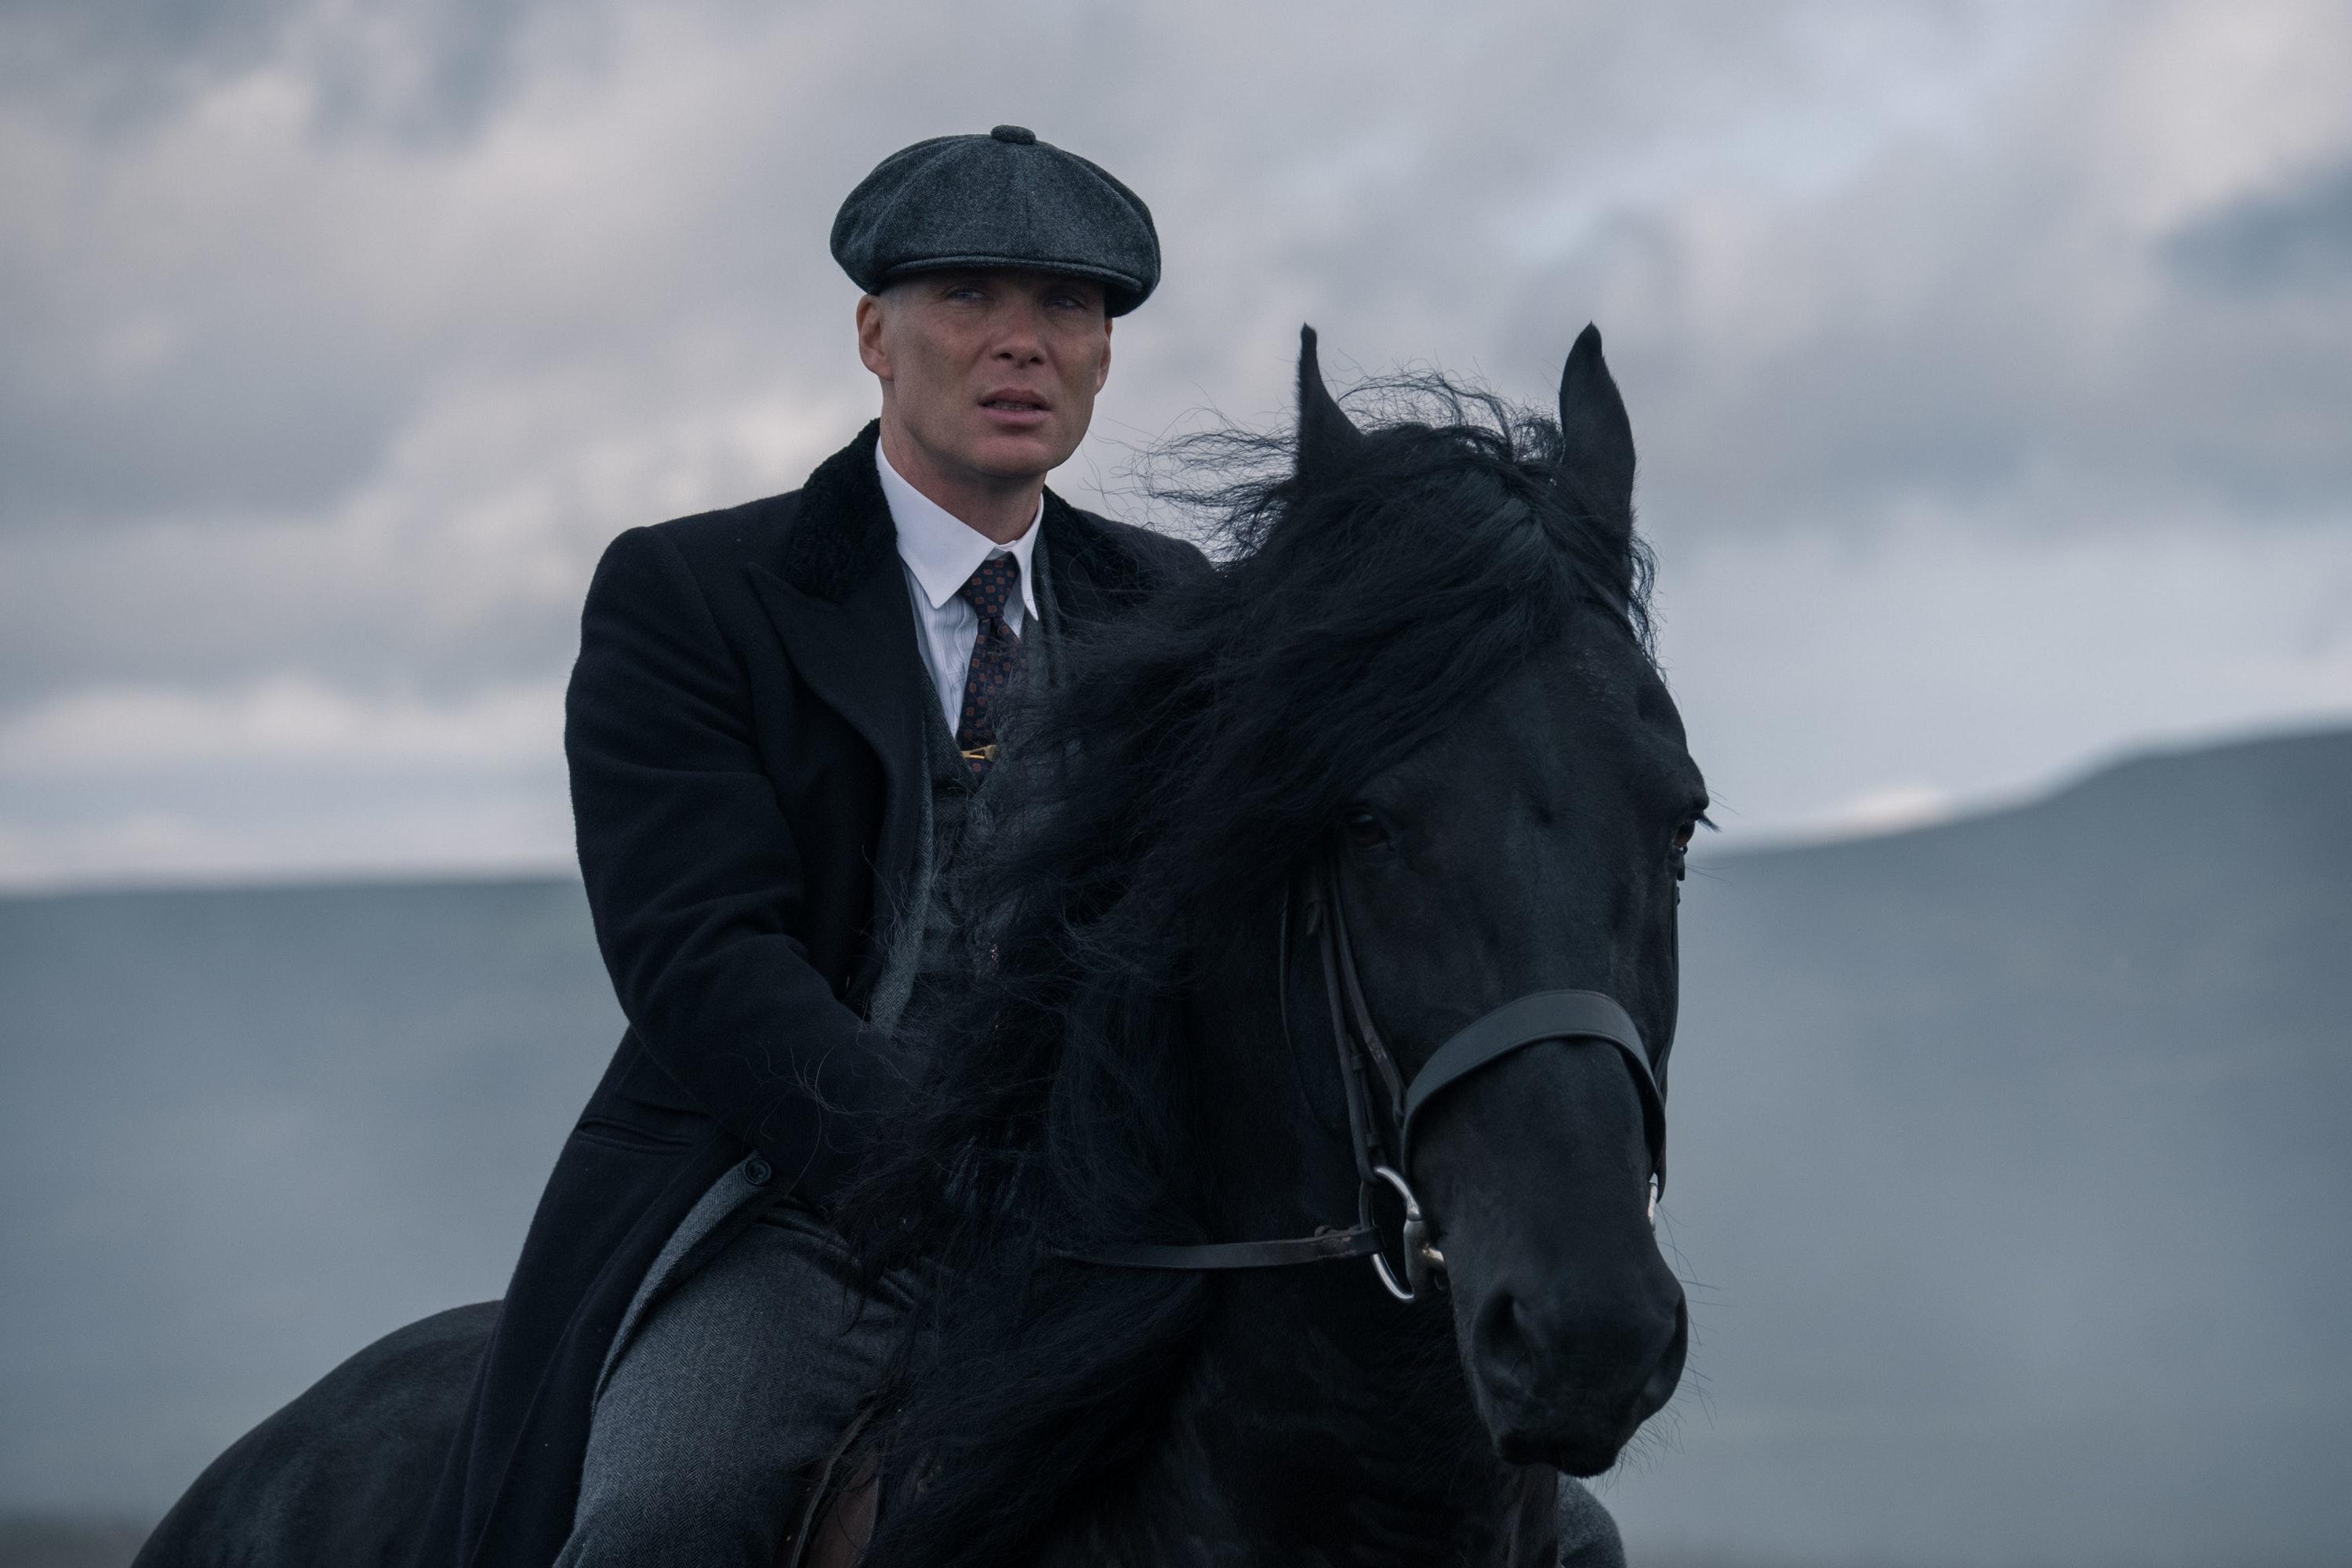 Peaky Blinders virtual reality game to launch in 2020